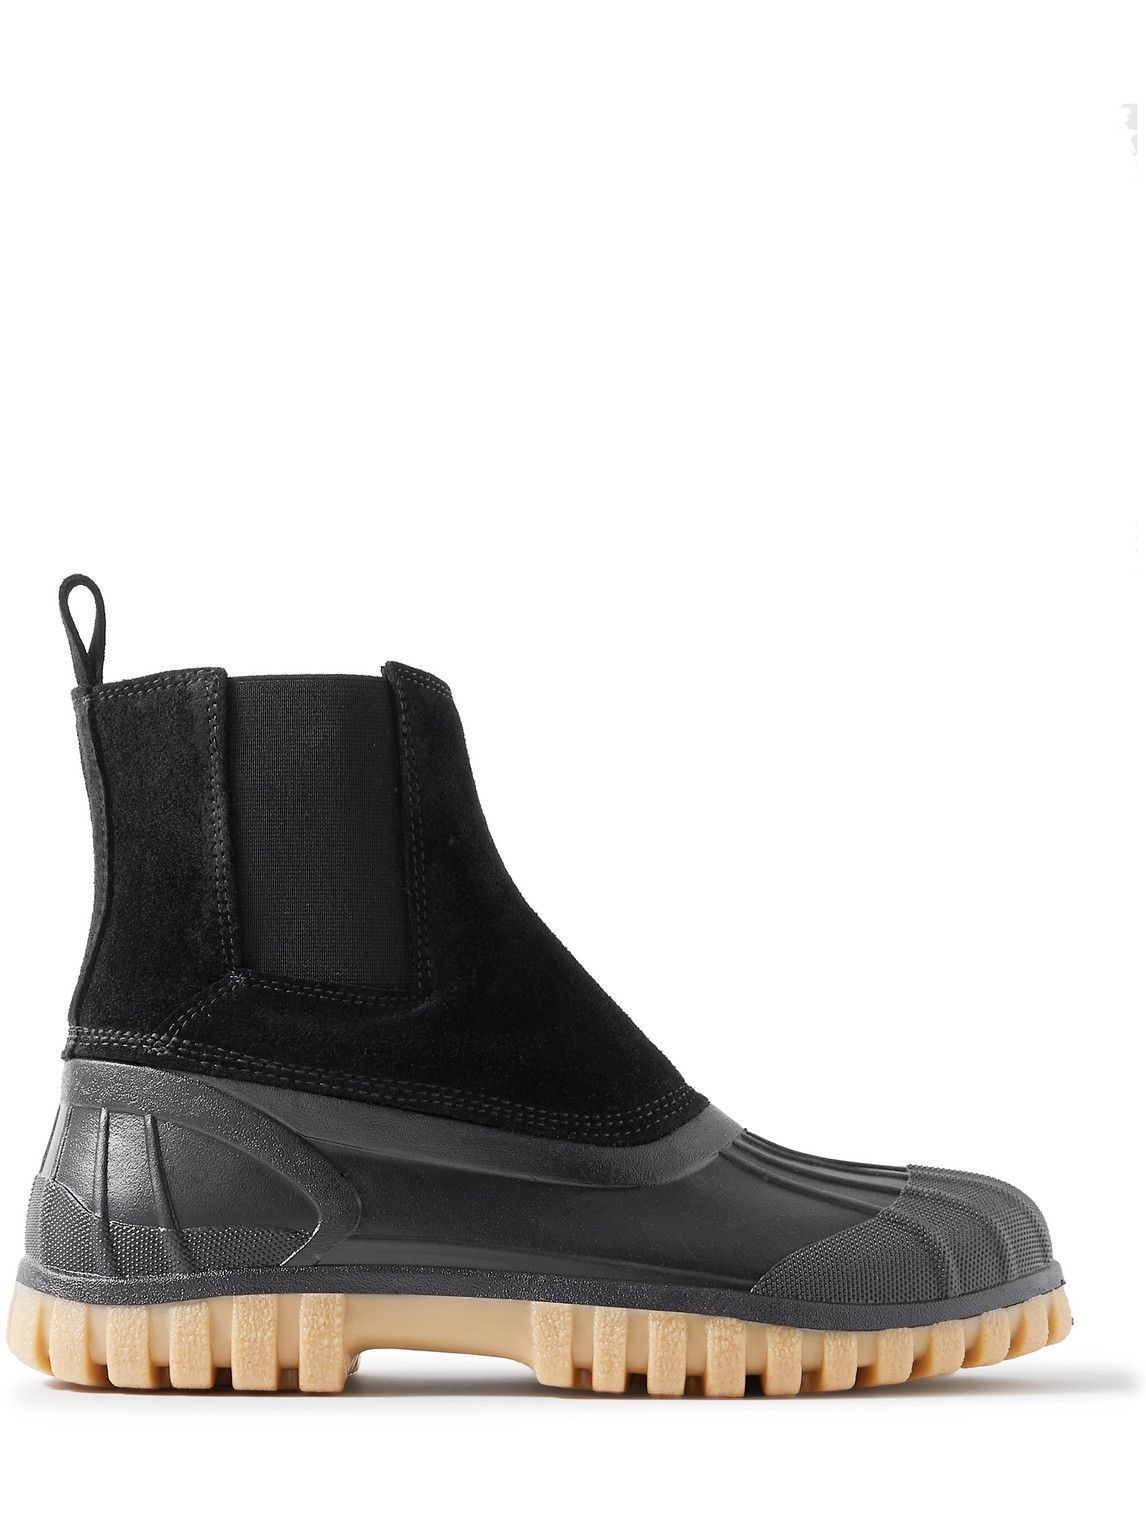 Photo: Diemme - Balbi Rubber and Suede Duck Boots - Black